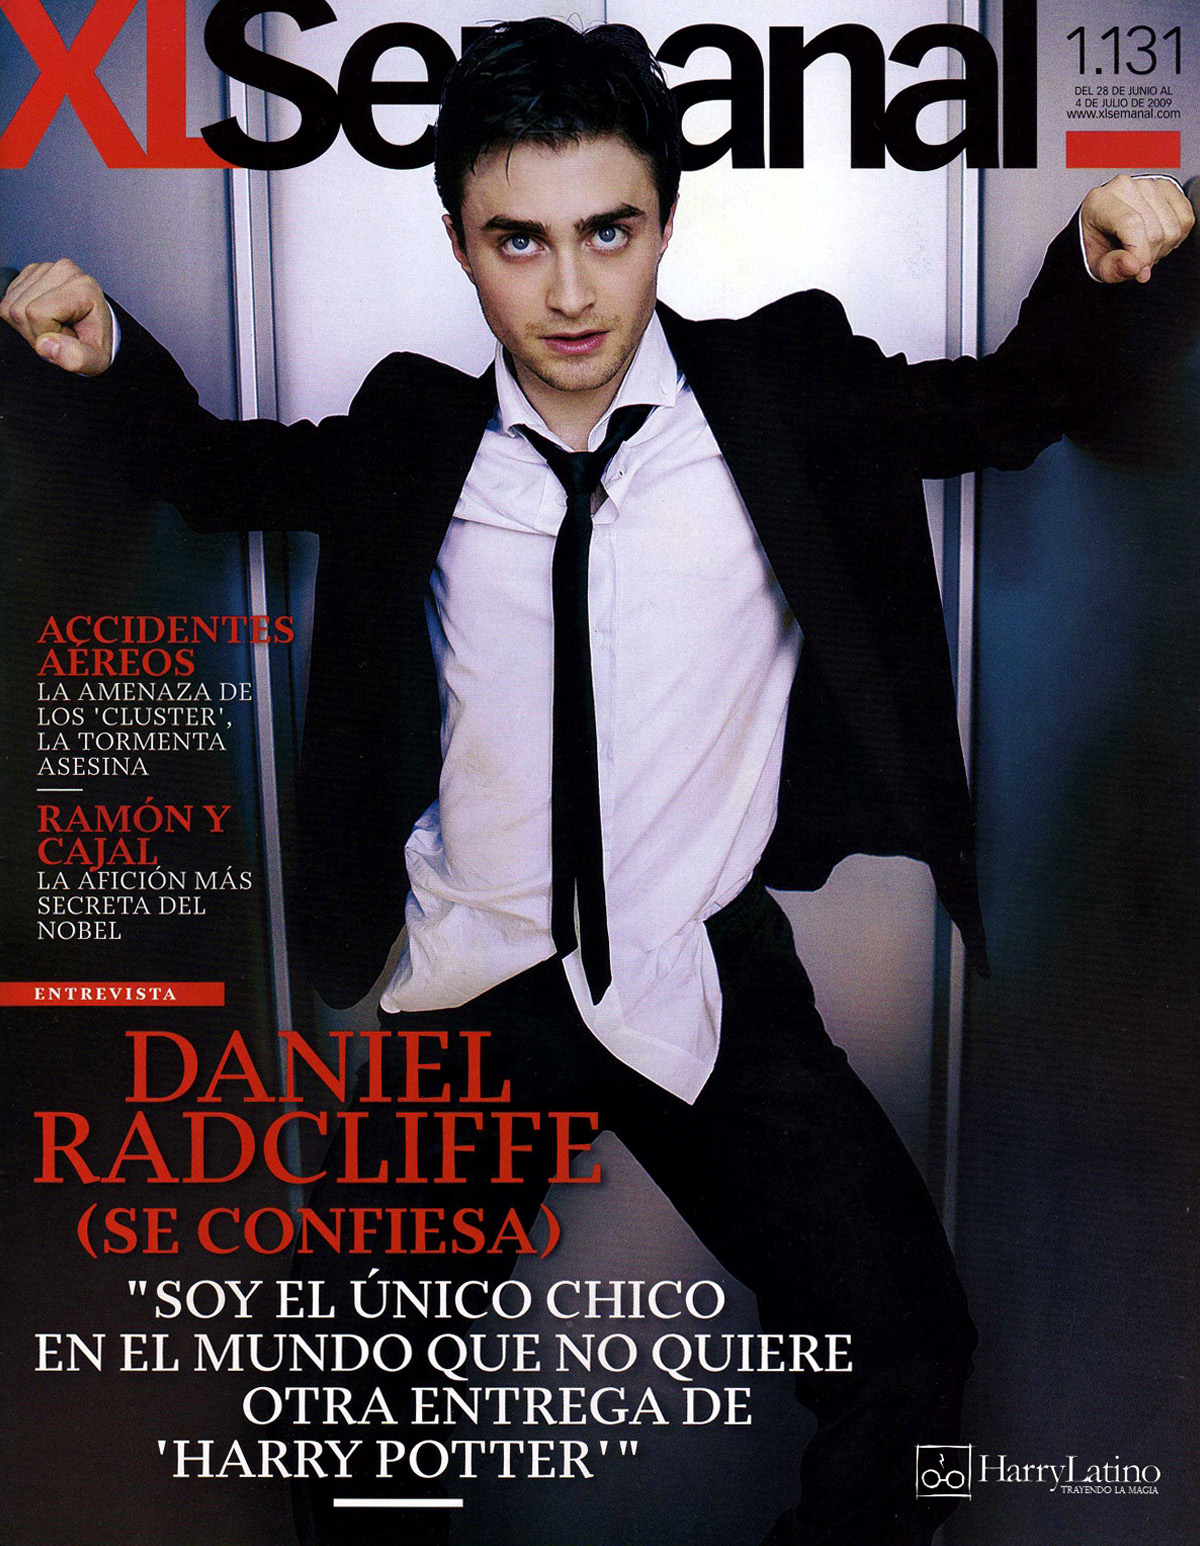 Daniel Radcliffe for Harry Potter and the Half-Blood Prince International Publicity Campaign.